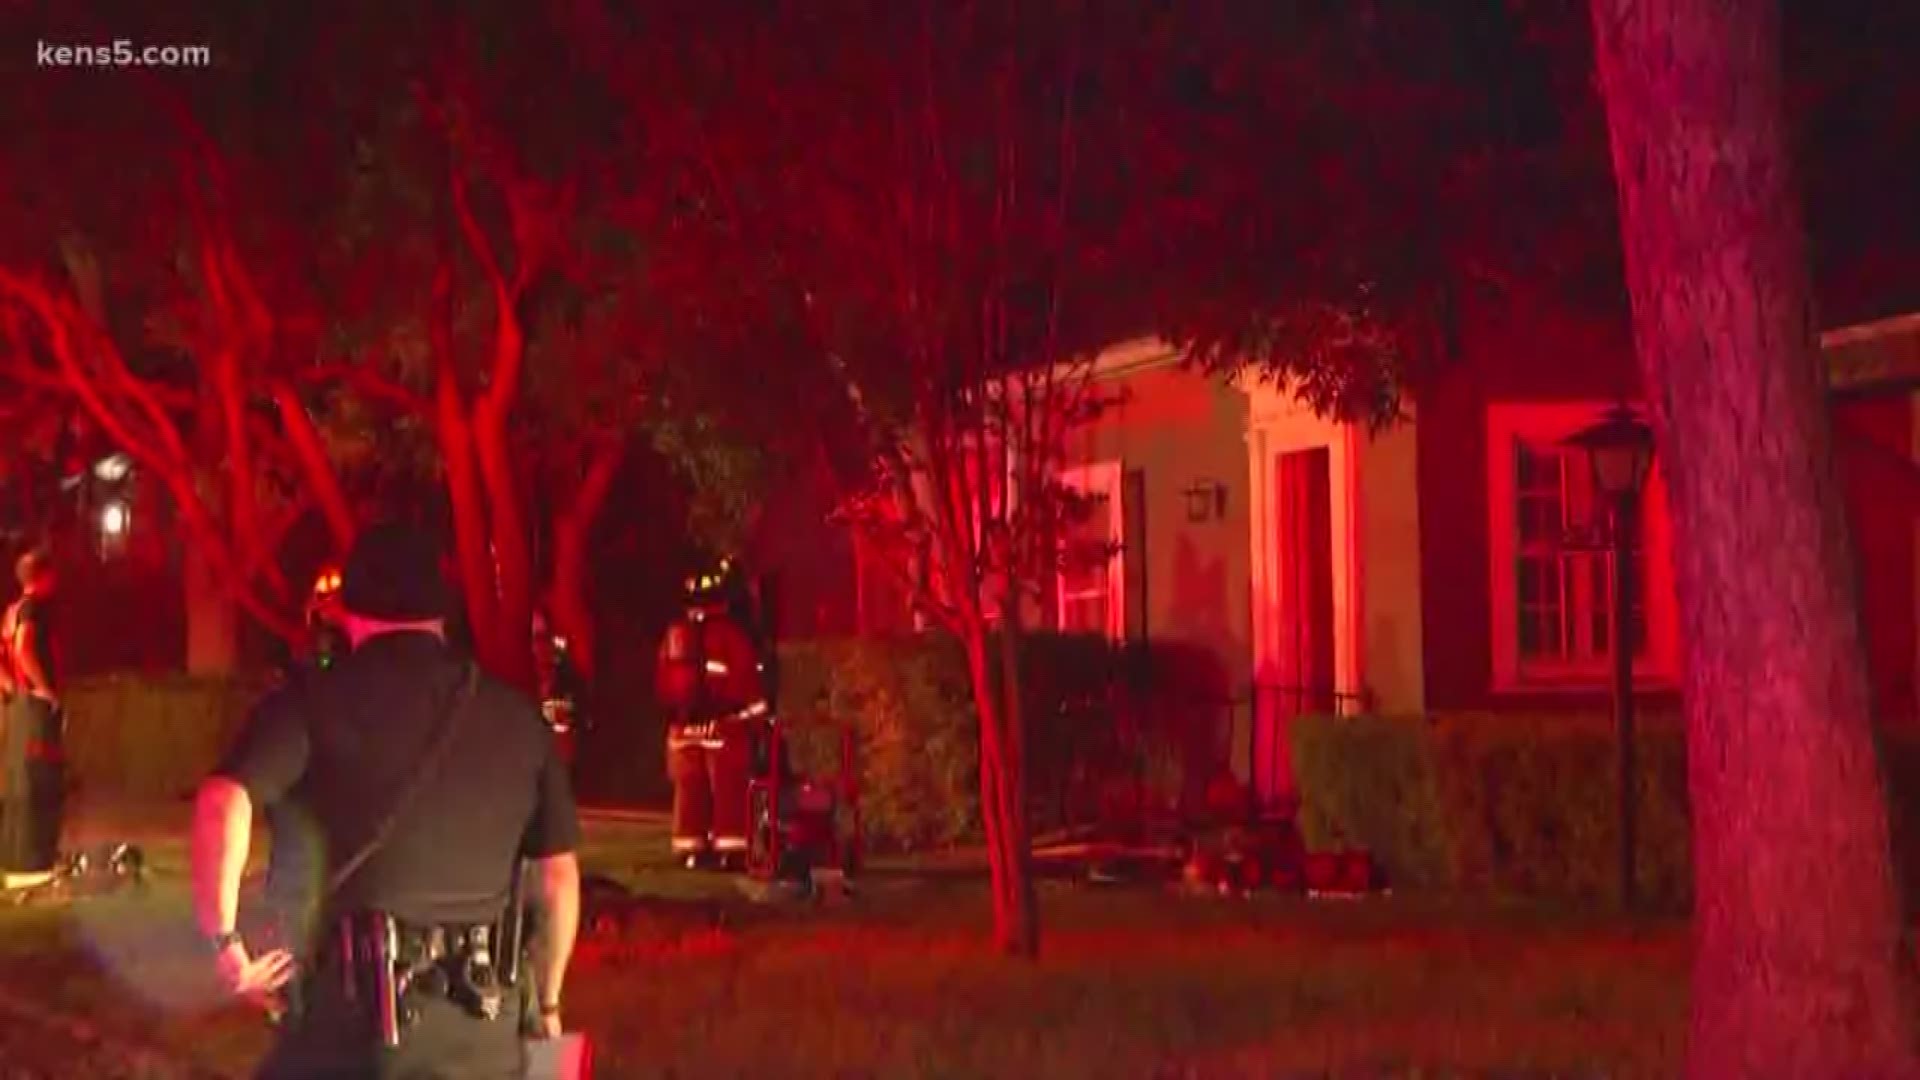 Woman, 5-year-old boy killed in house fire